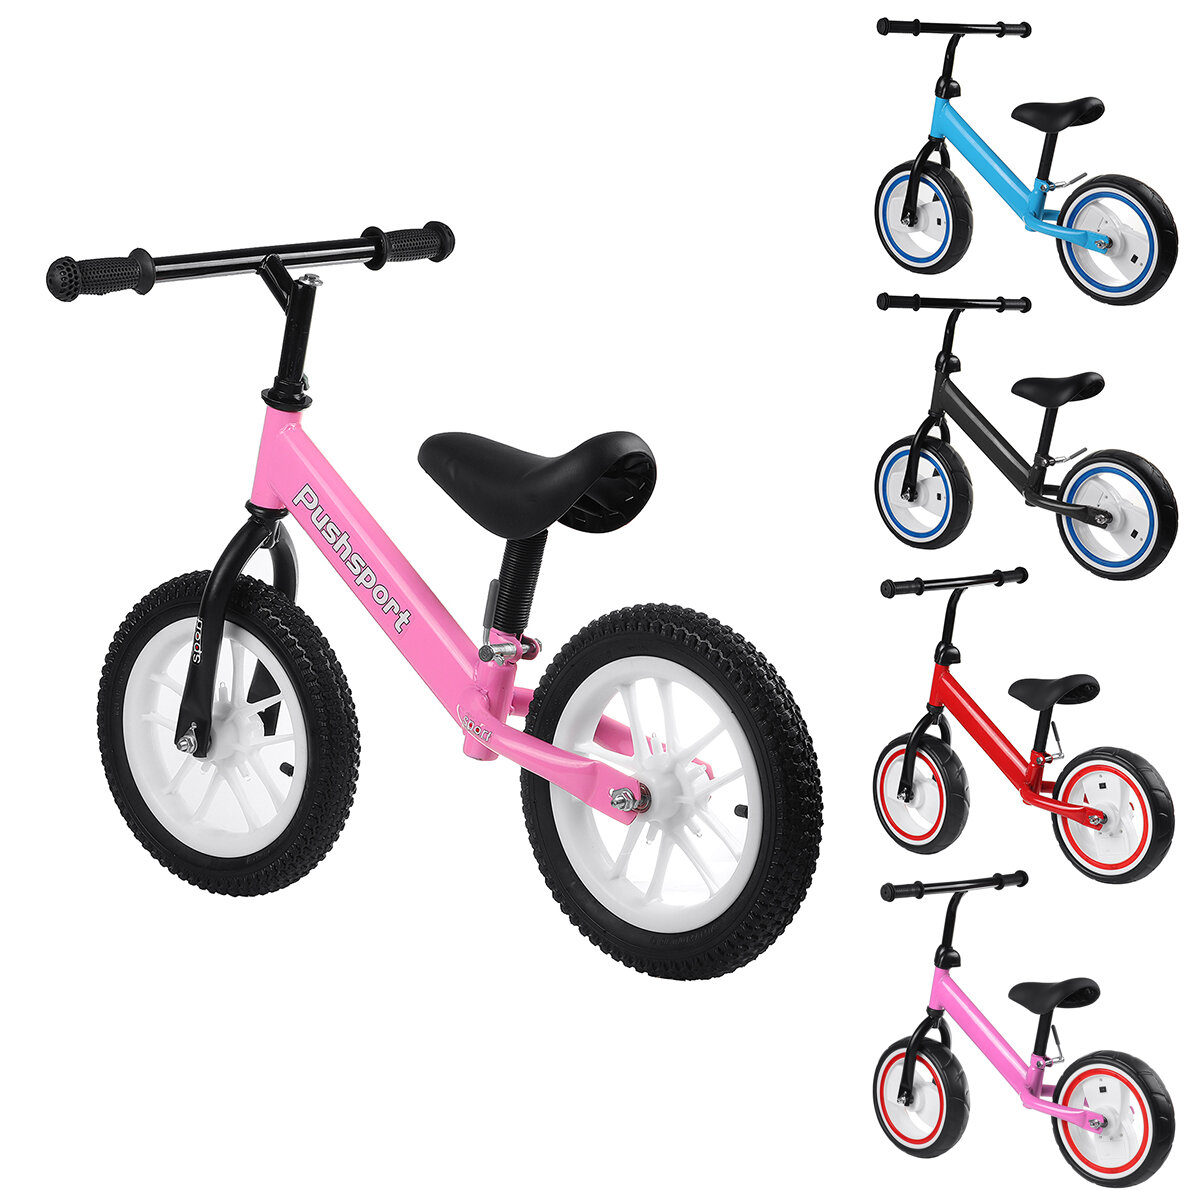 Kids Adjustable Height Flashing Balance Bikes Children Bicycle with Comfortable Cushions＆Non-slip Handles Wear-resistant